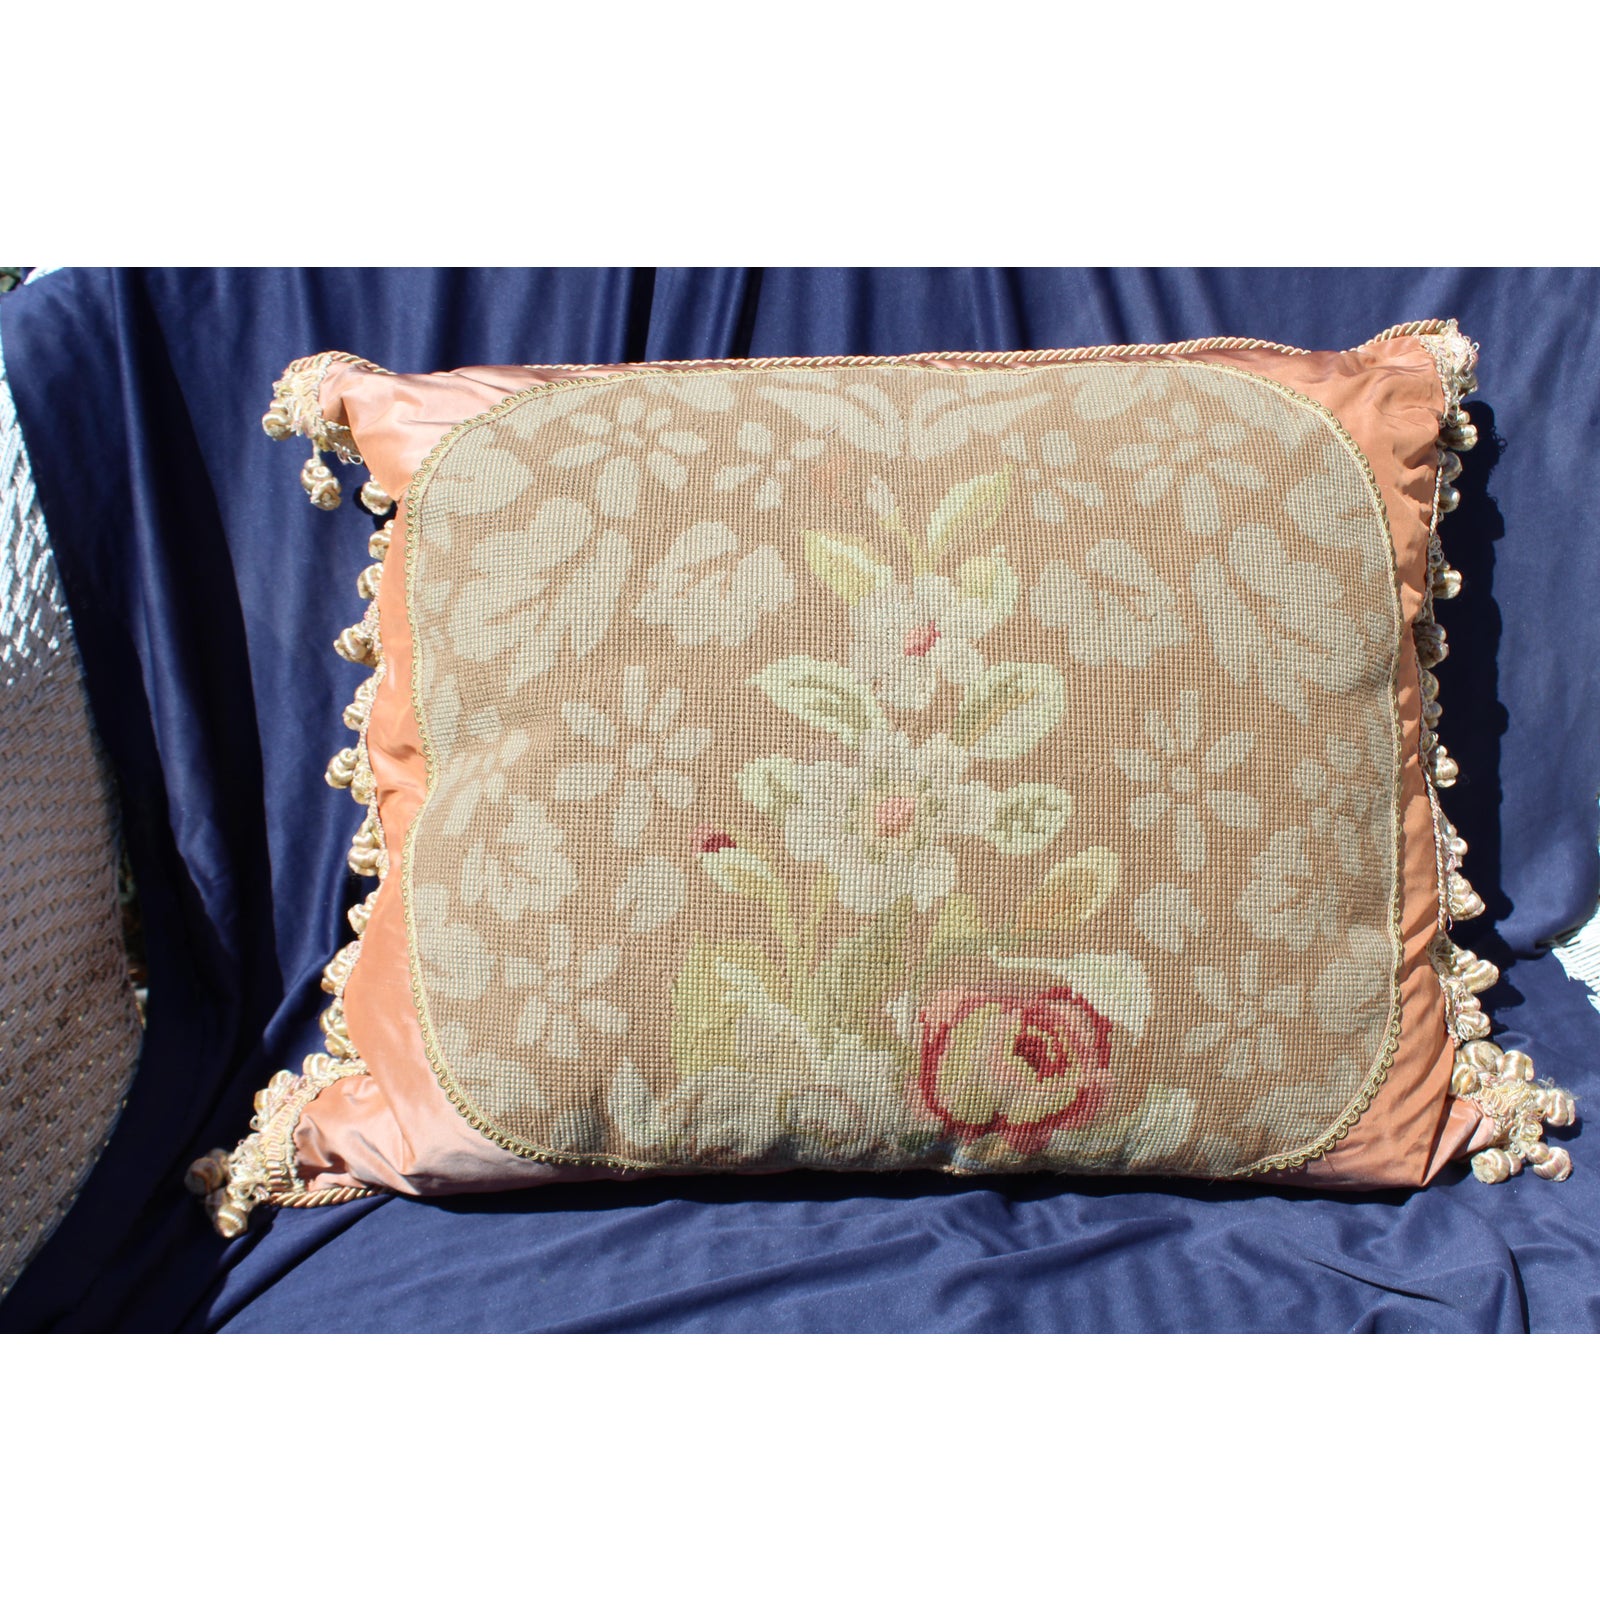 19th-century-antique-french-needlepoint-silk-and-velvet-pillow-6297